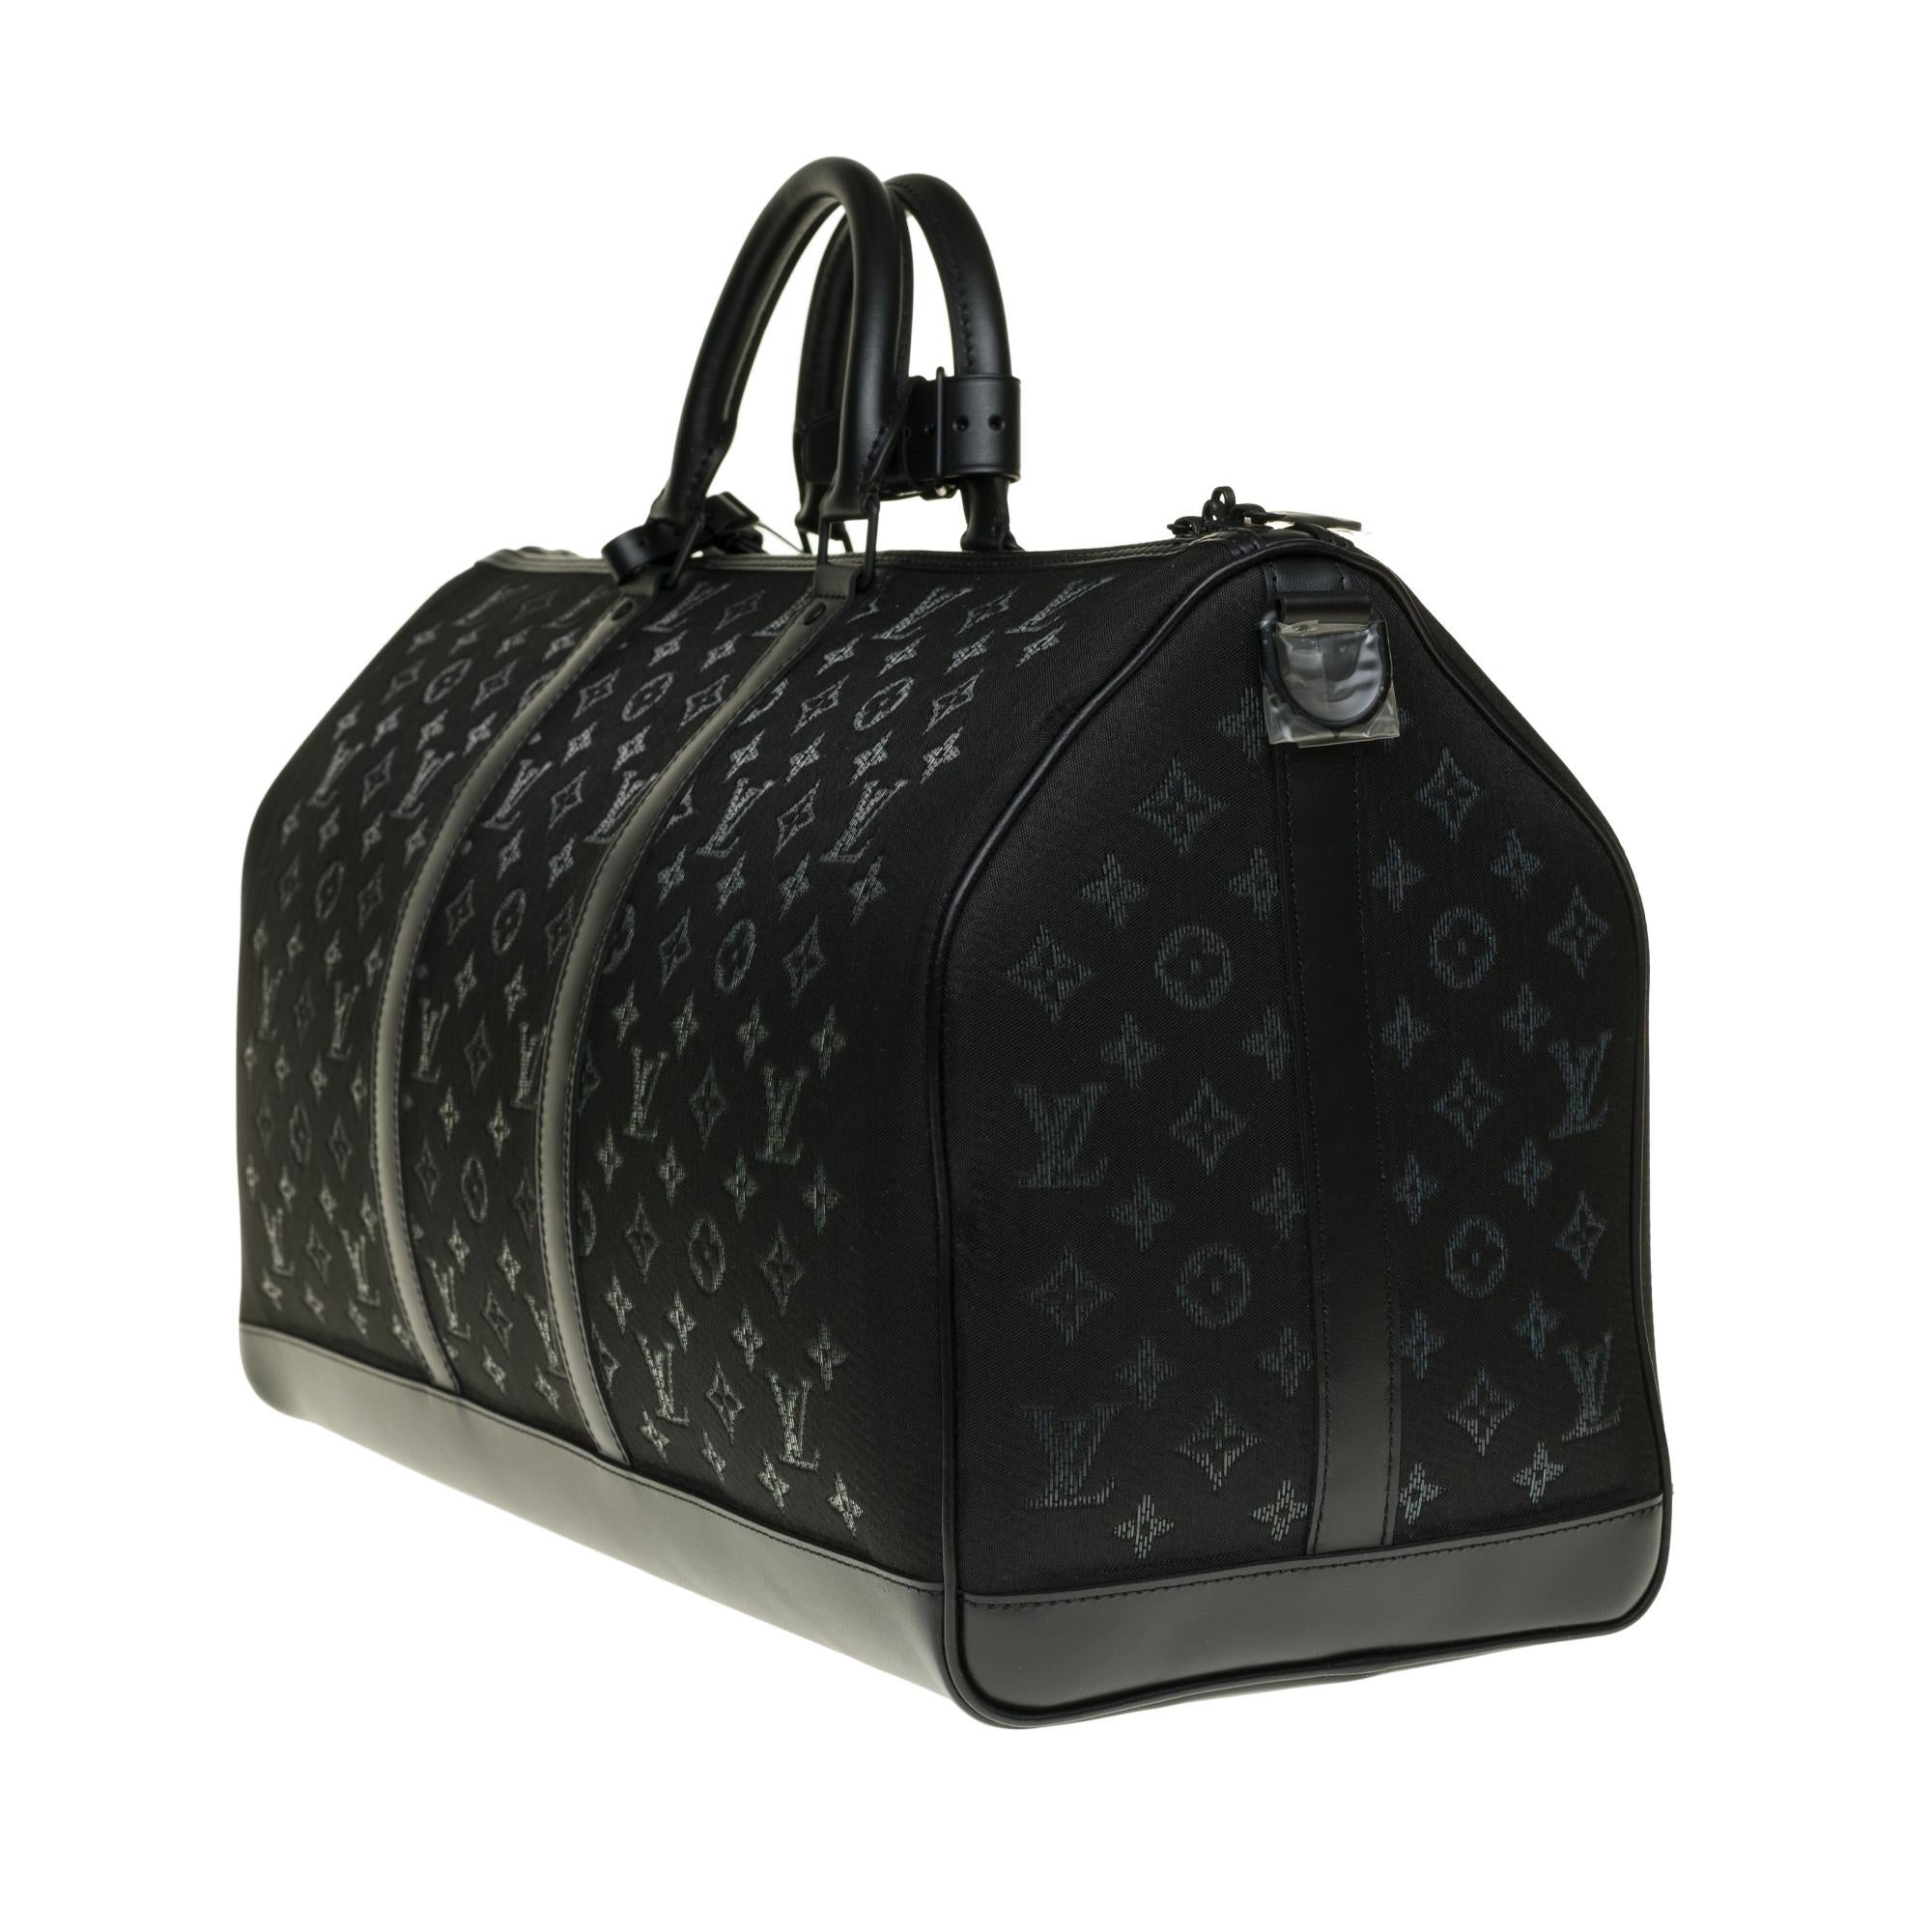 Women's or Men's BRAND NEW-Limited edition Louis Vuitton keepall 50 Light Up virgil abloh fw19